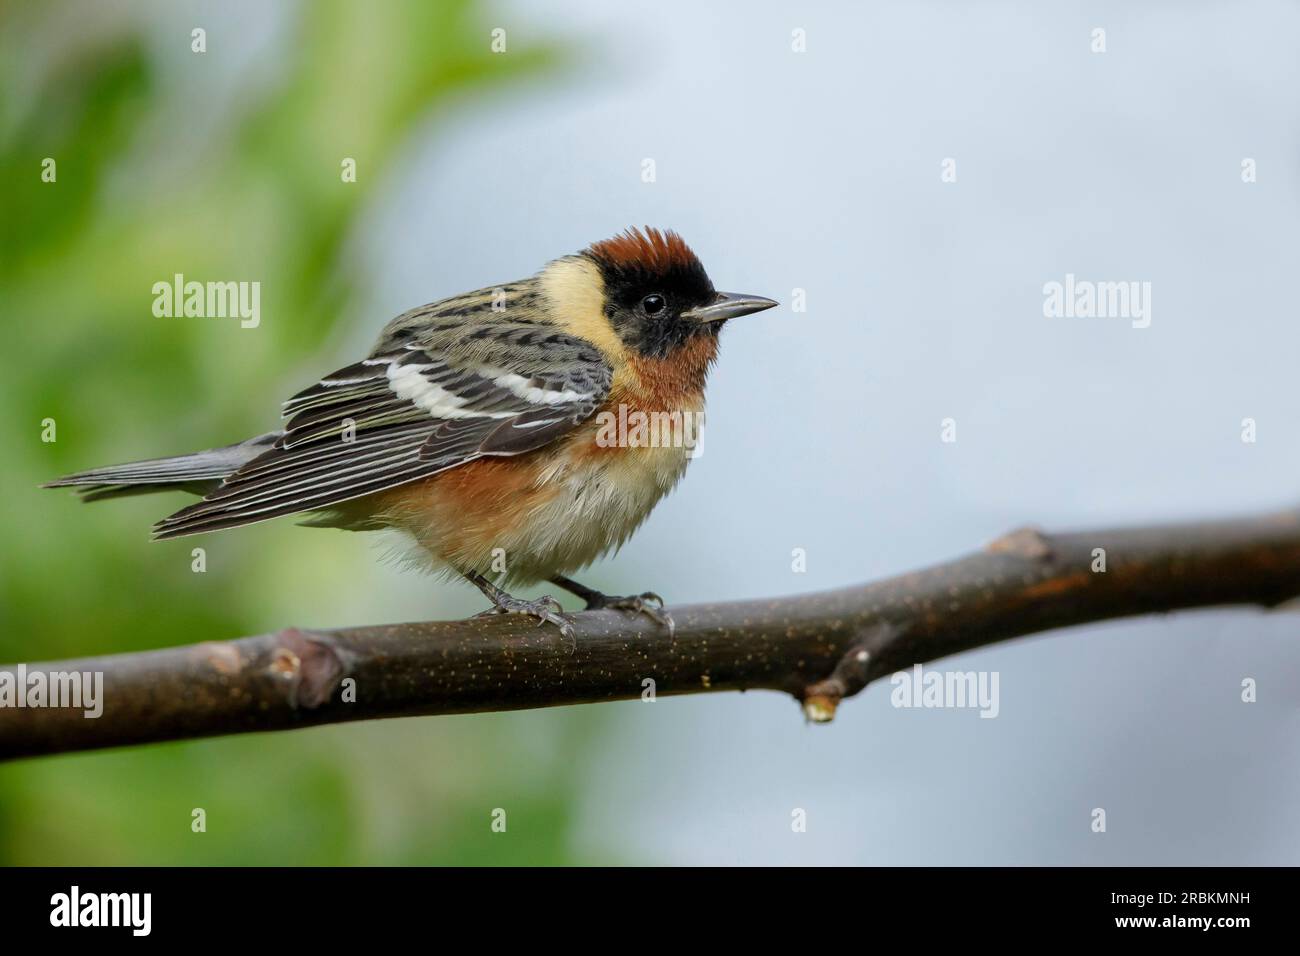 bay-breasted warbler (Setophaga castanea, Dendroica castanea), adult male perched on a branch, USA, Texas Stock Photo